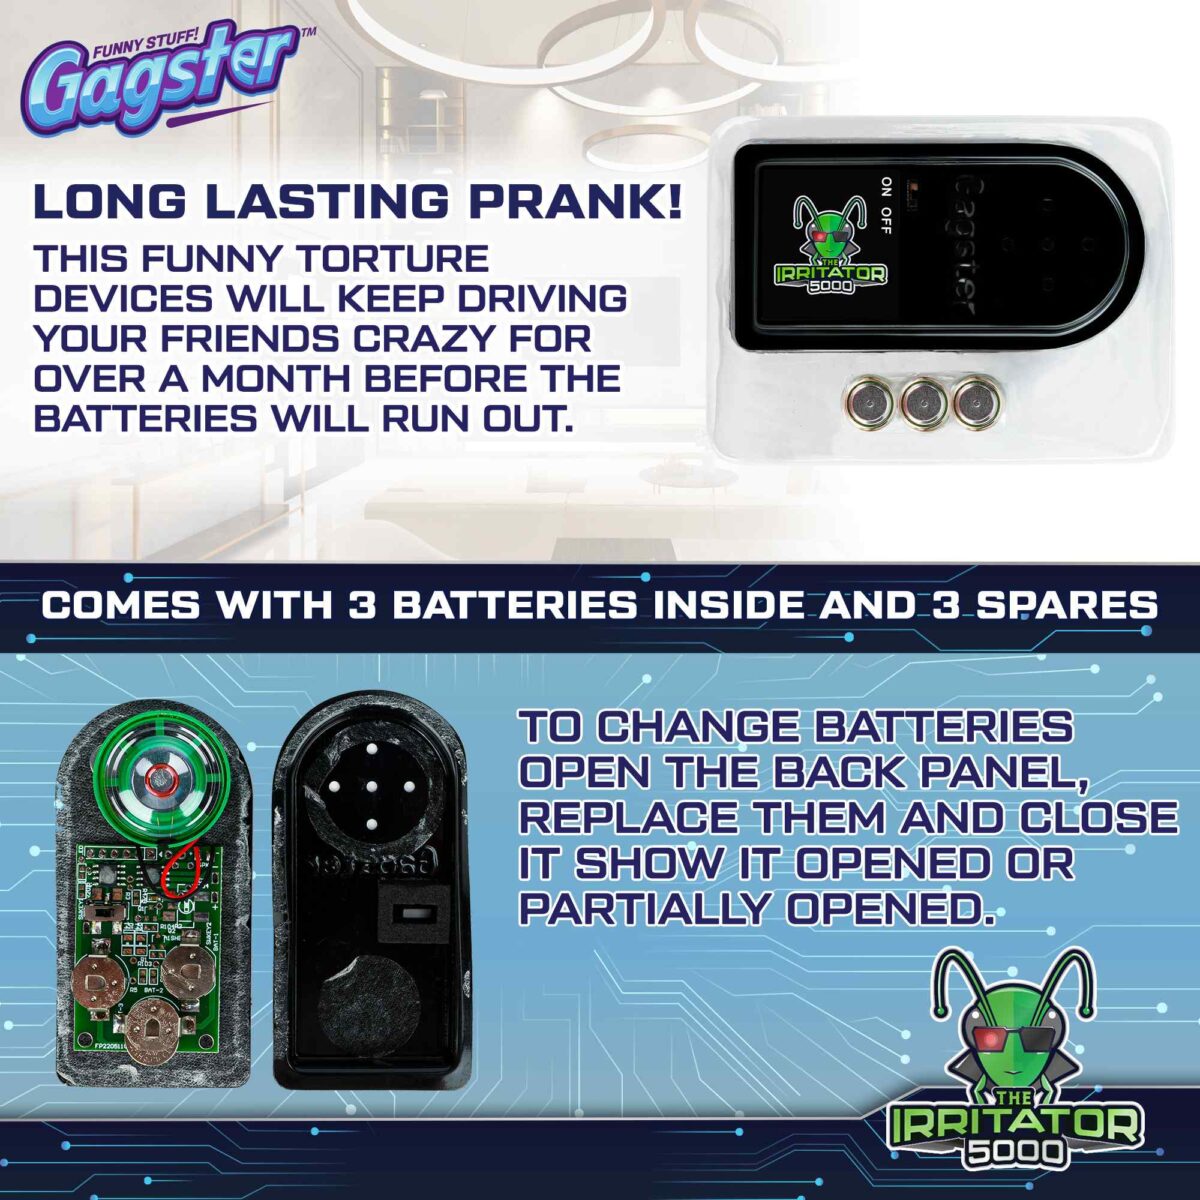 "gagster products The Irritator 5000 ultimate cricket noise prank noisemaker PCB torture device small beeping device annoying pcb beeping prank device annoyingpcb - the prank device that won’t stop beeping for 3 years how to find annoying pcb hidden annoying noise maker annoying pcb amazon annoying pcb instructions annoying pcb beeper annoying pcb mini"